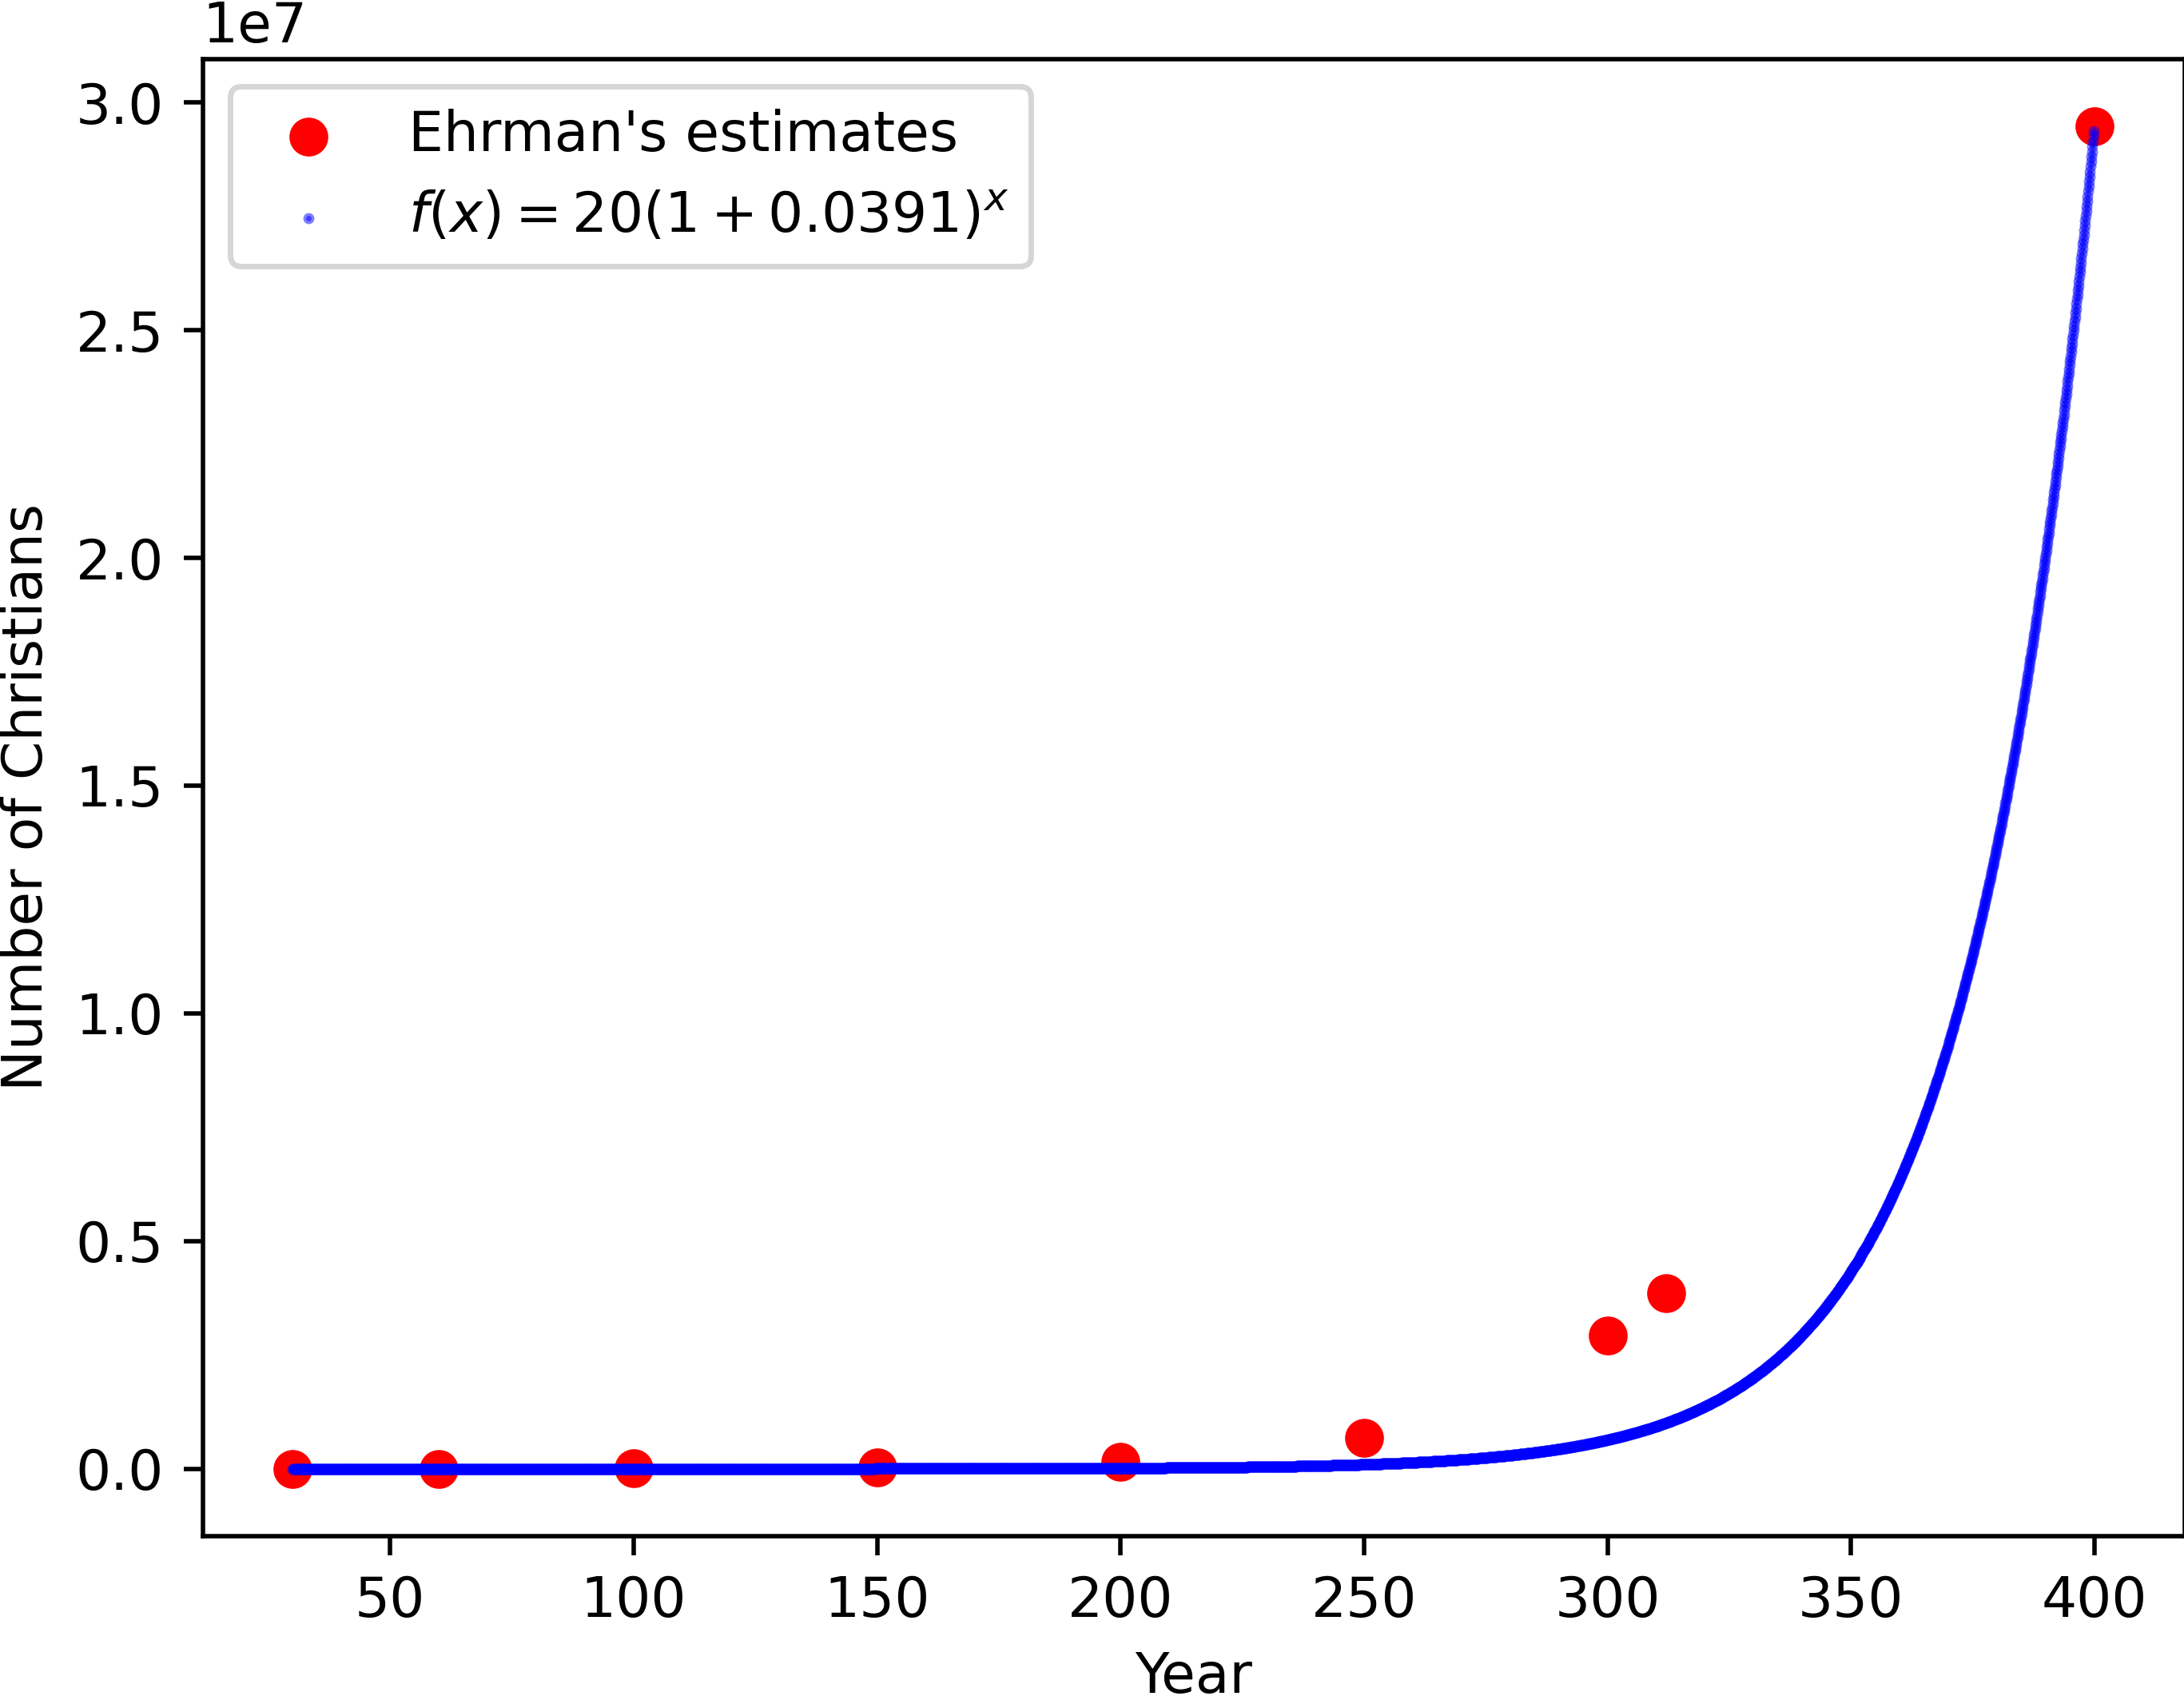 Figure 2. Exponential growth for Ehrman&rsquo;s estimates &ndash; note the lack of exact fit